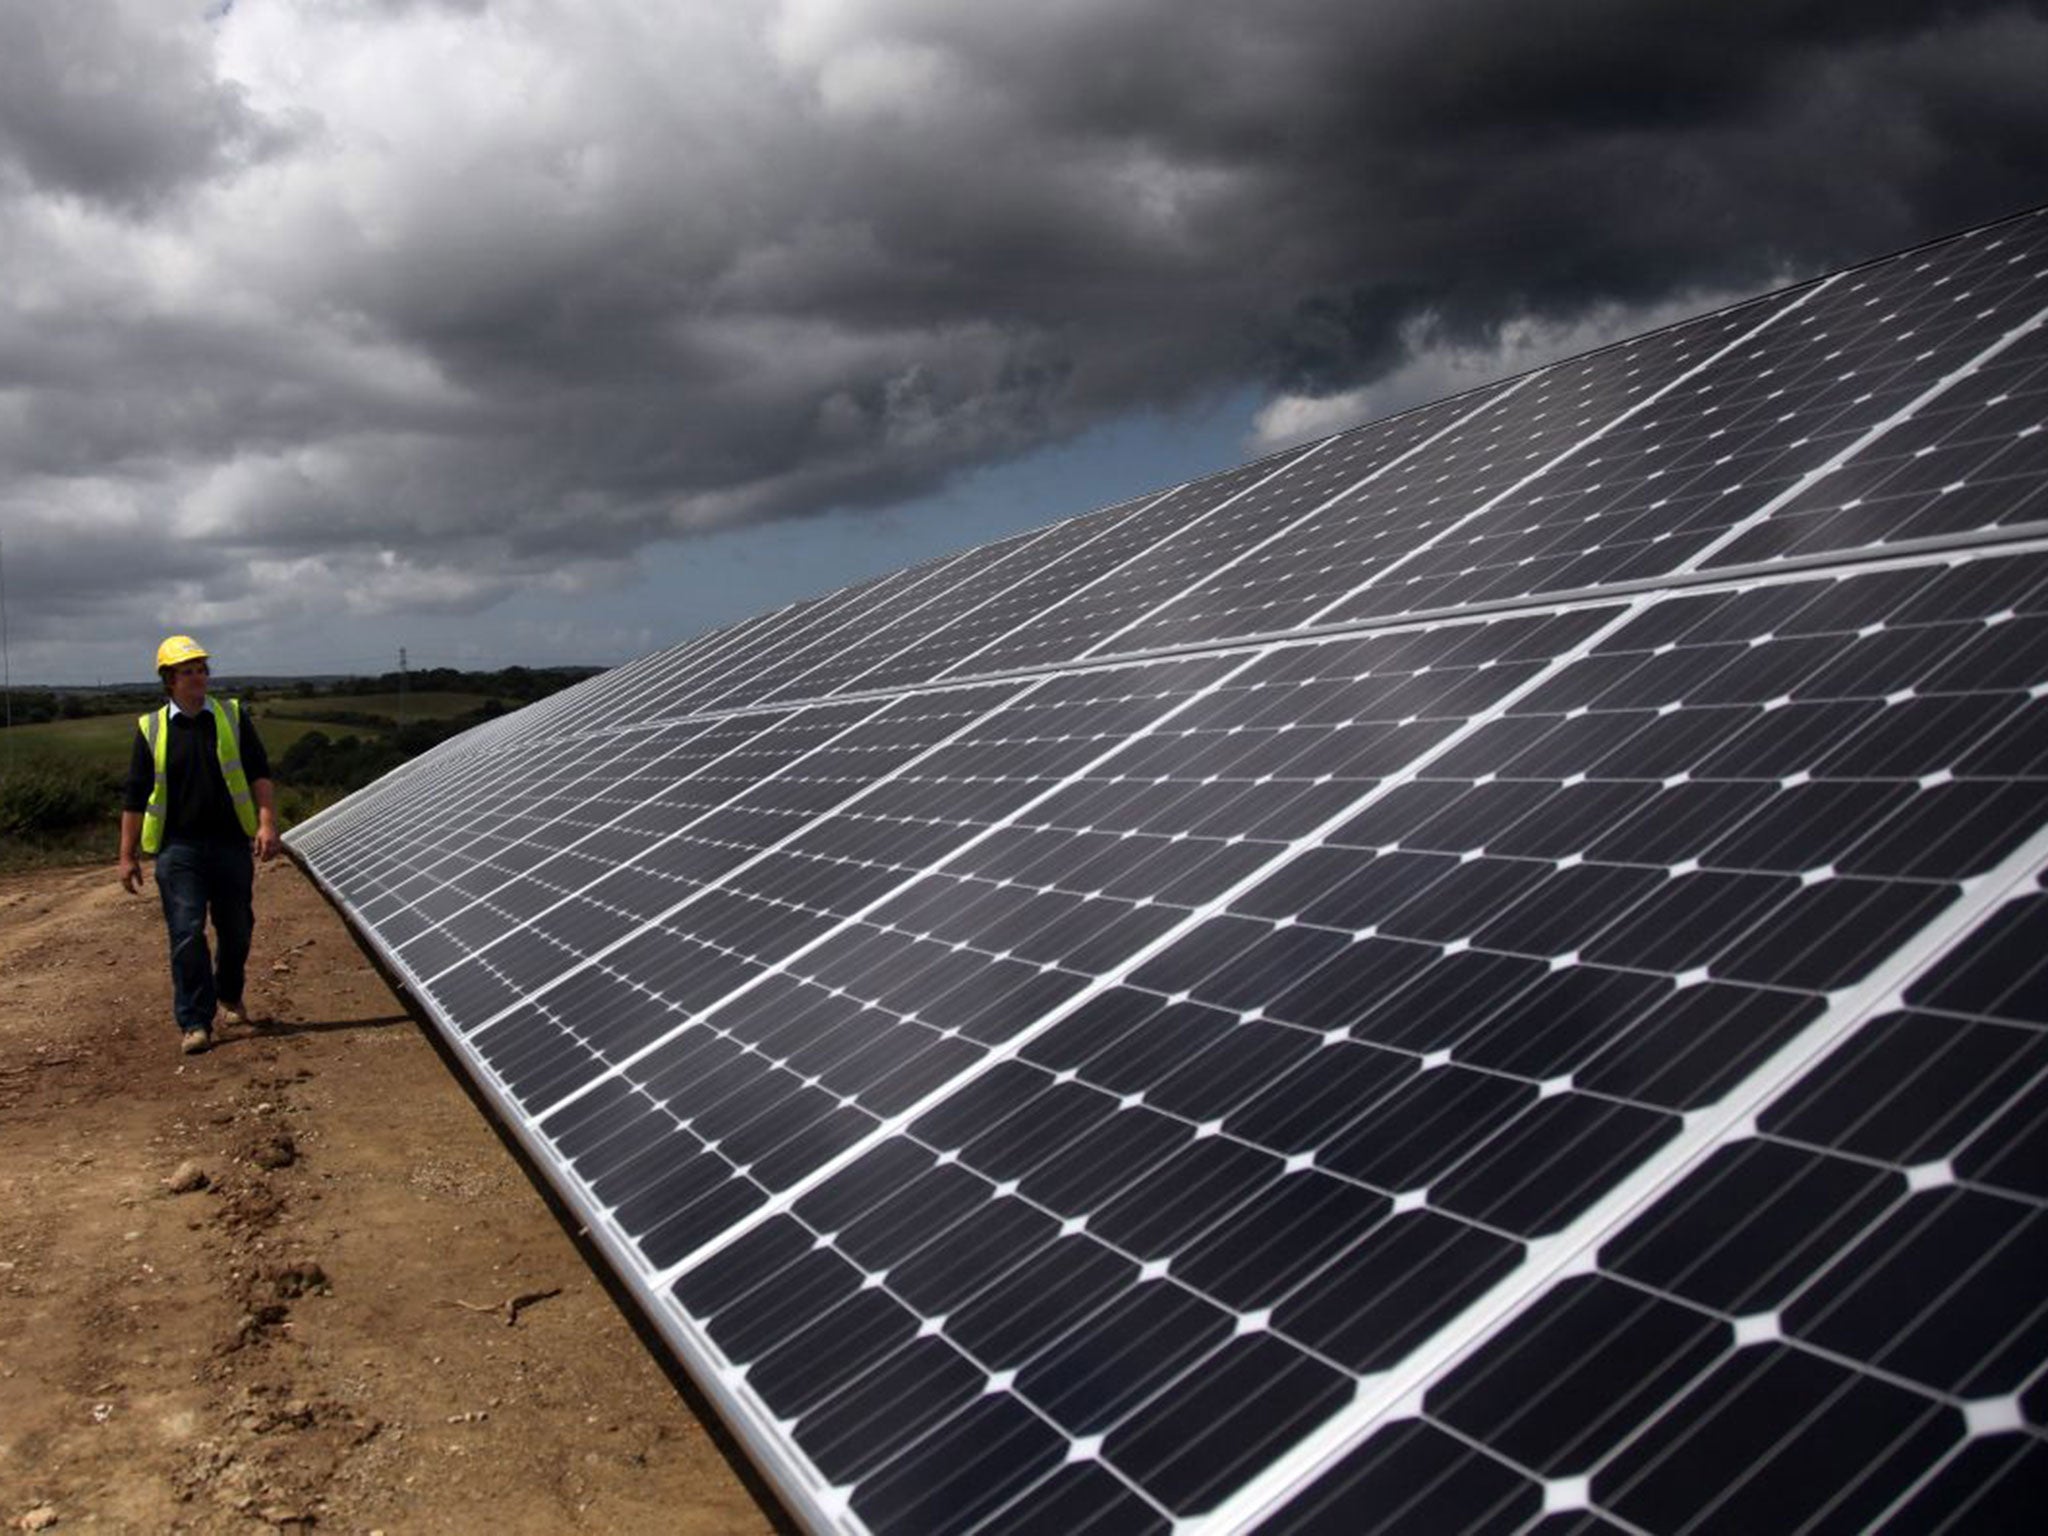 Making and maintaining solar panels will soon be cheaper than fossil fuels